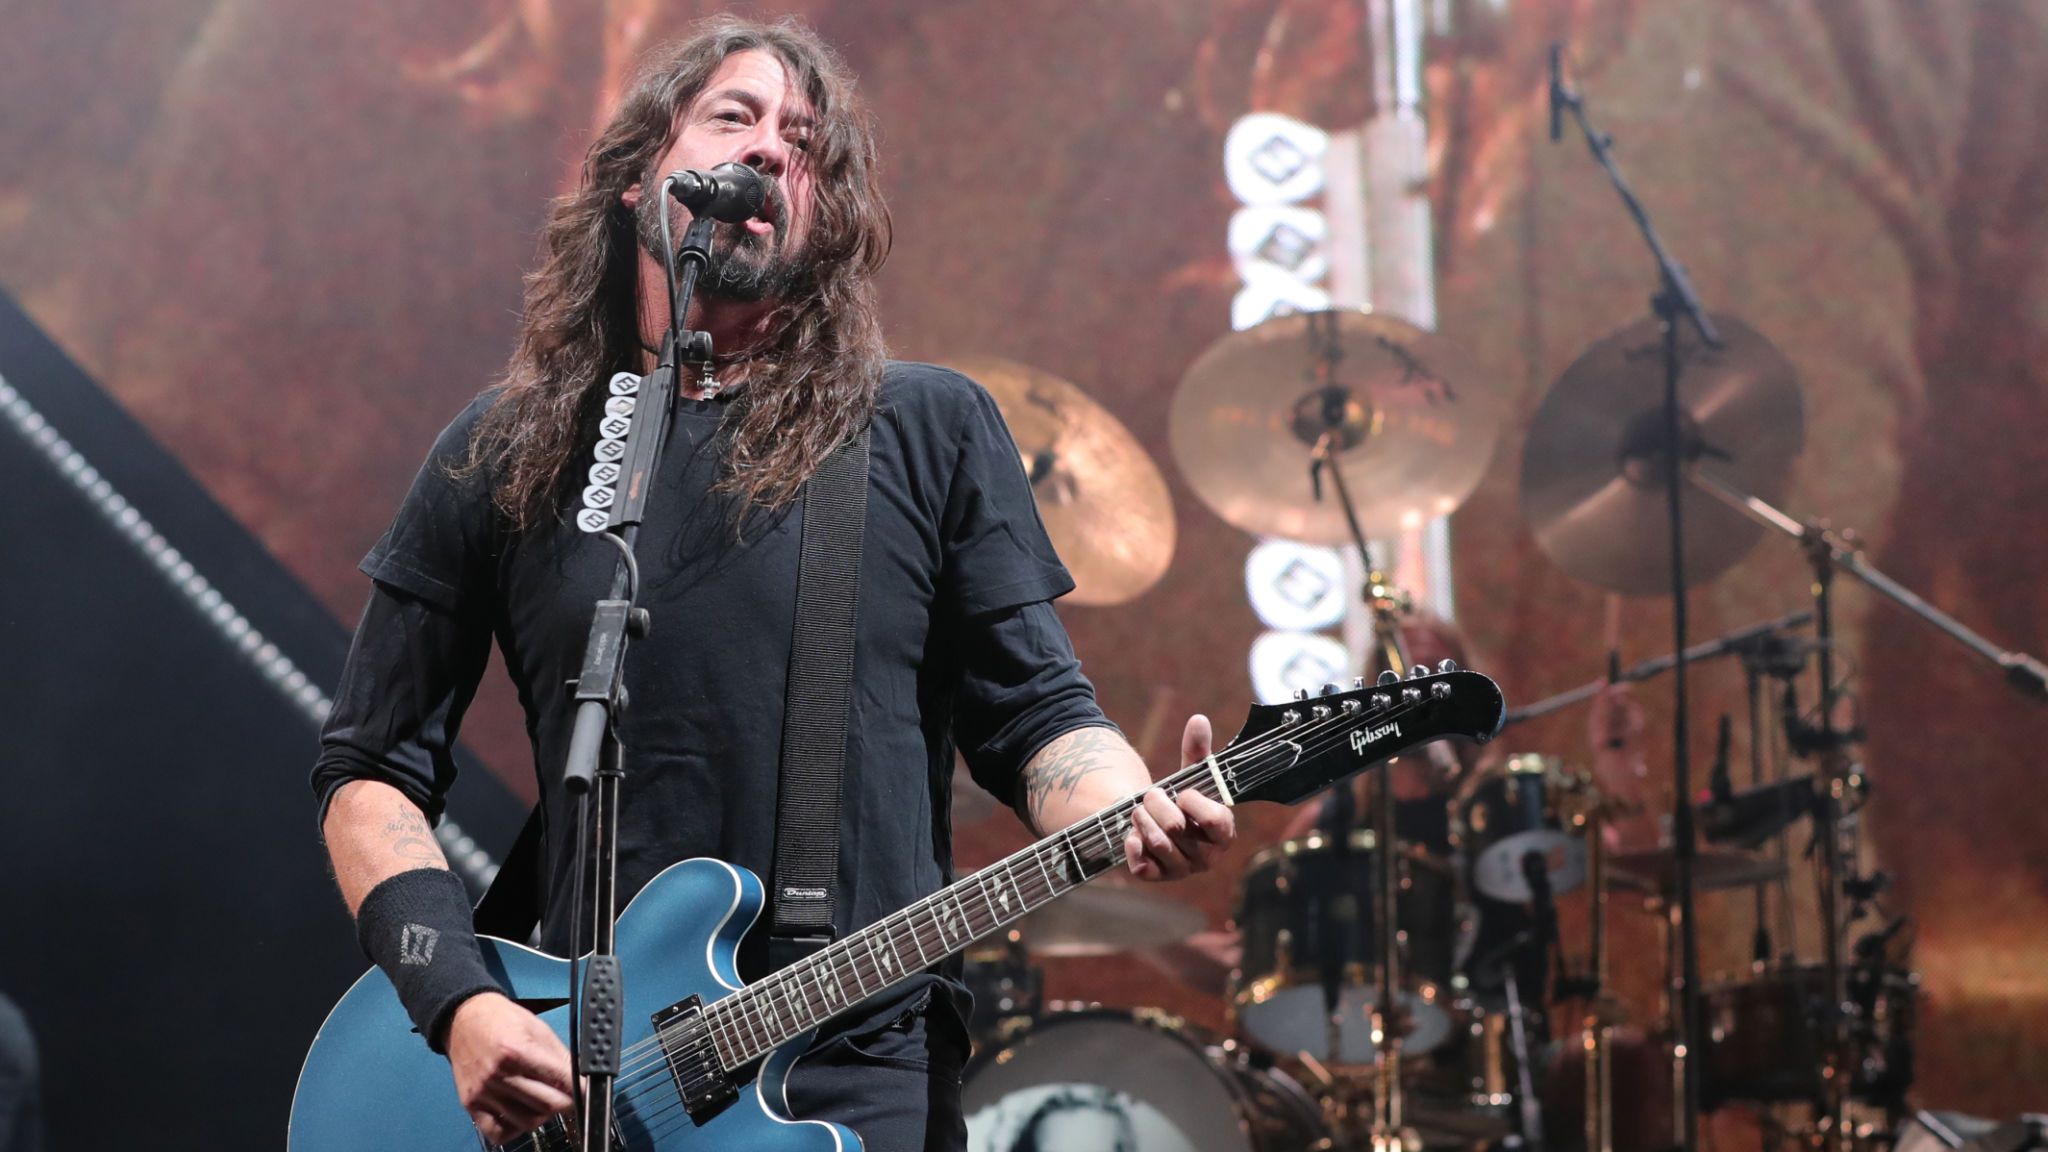 Dave Grohl Of Foo Fighters Performs On Stage During - Rock Concert - HD Wallpaper 